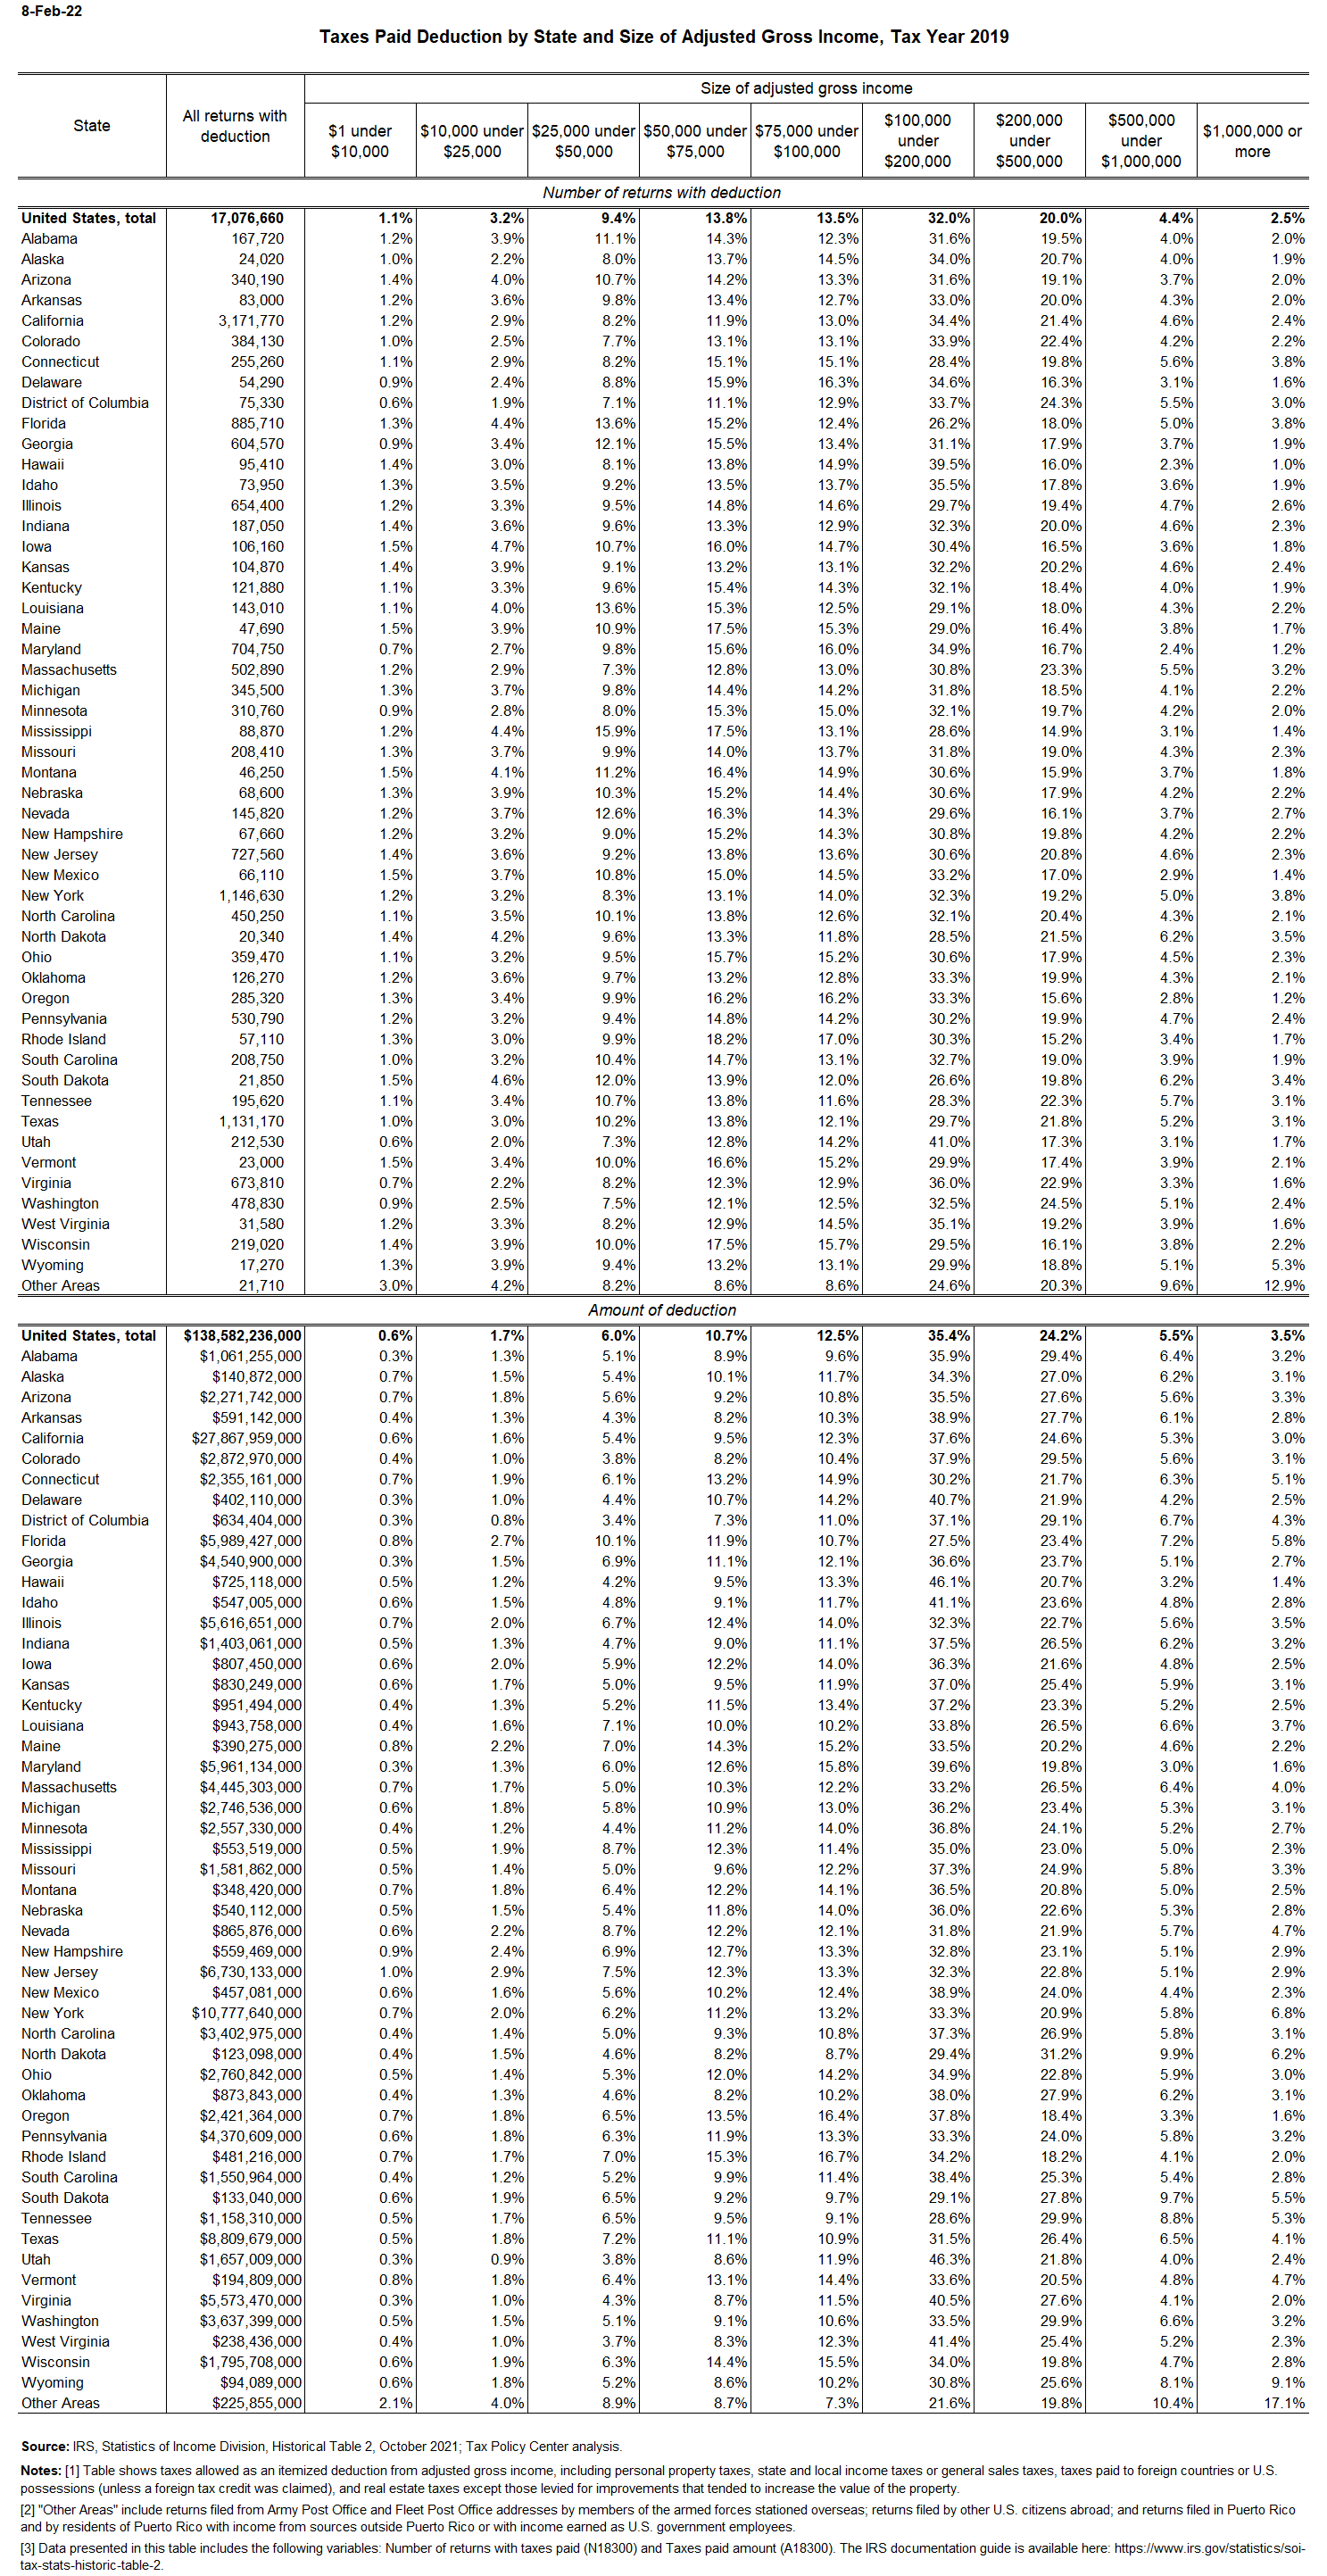 Taxes paid deduction by state and AGI